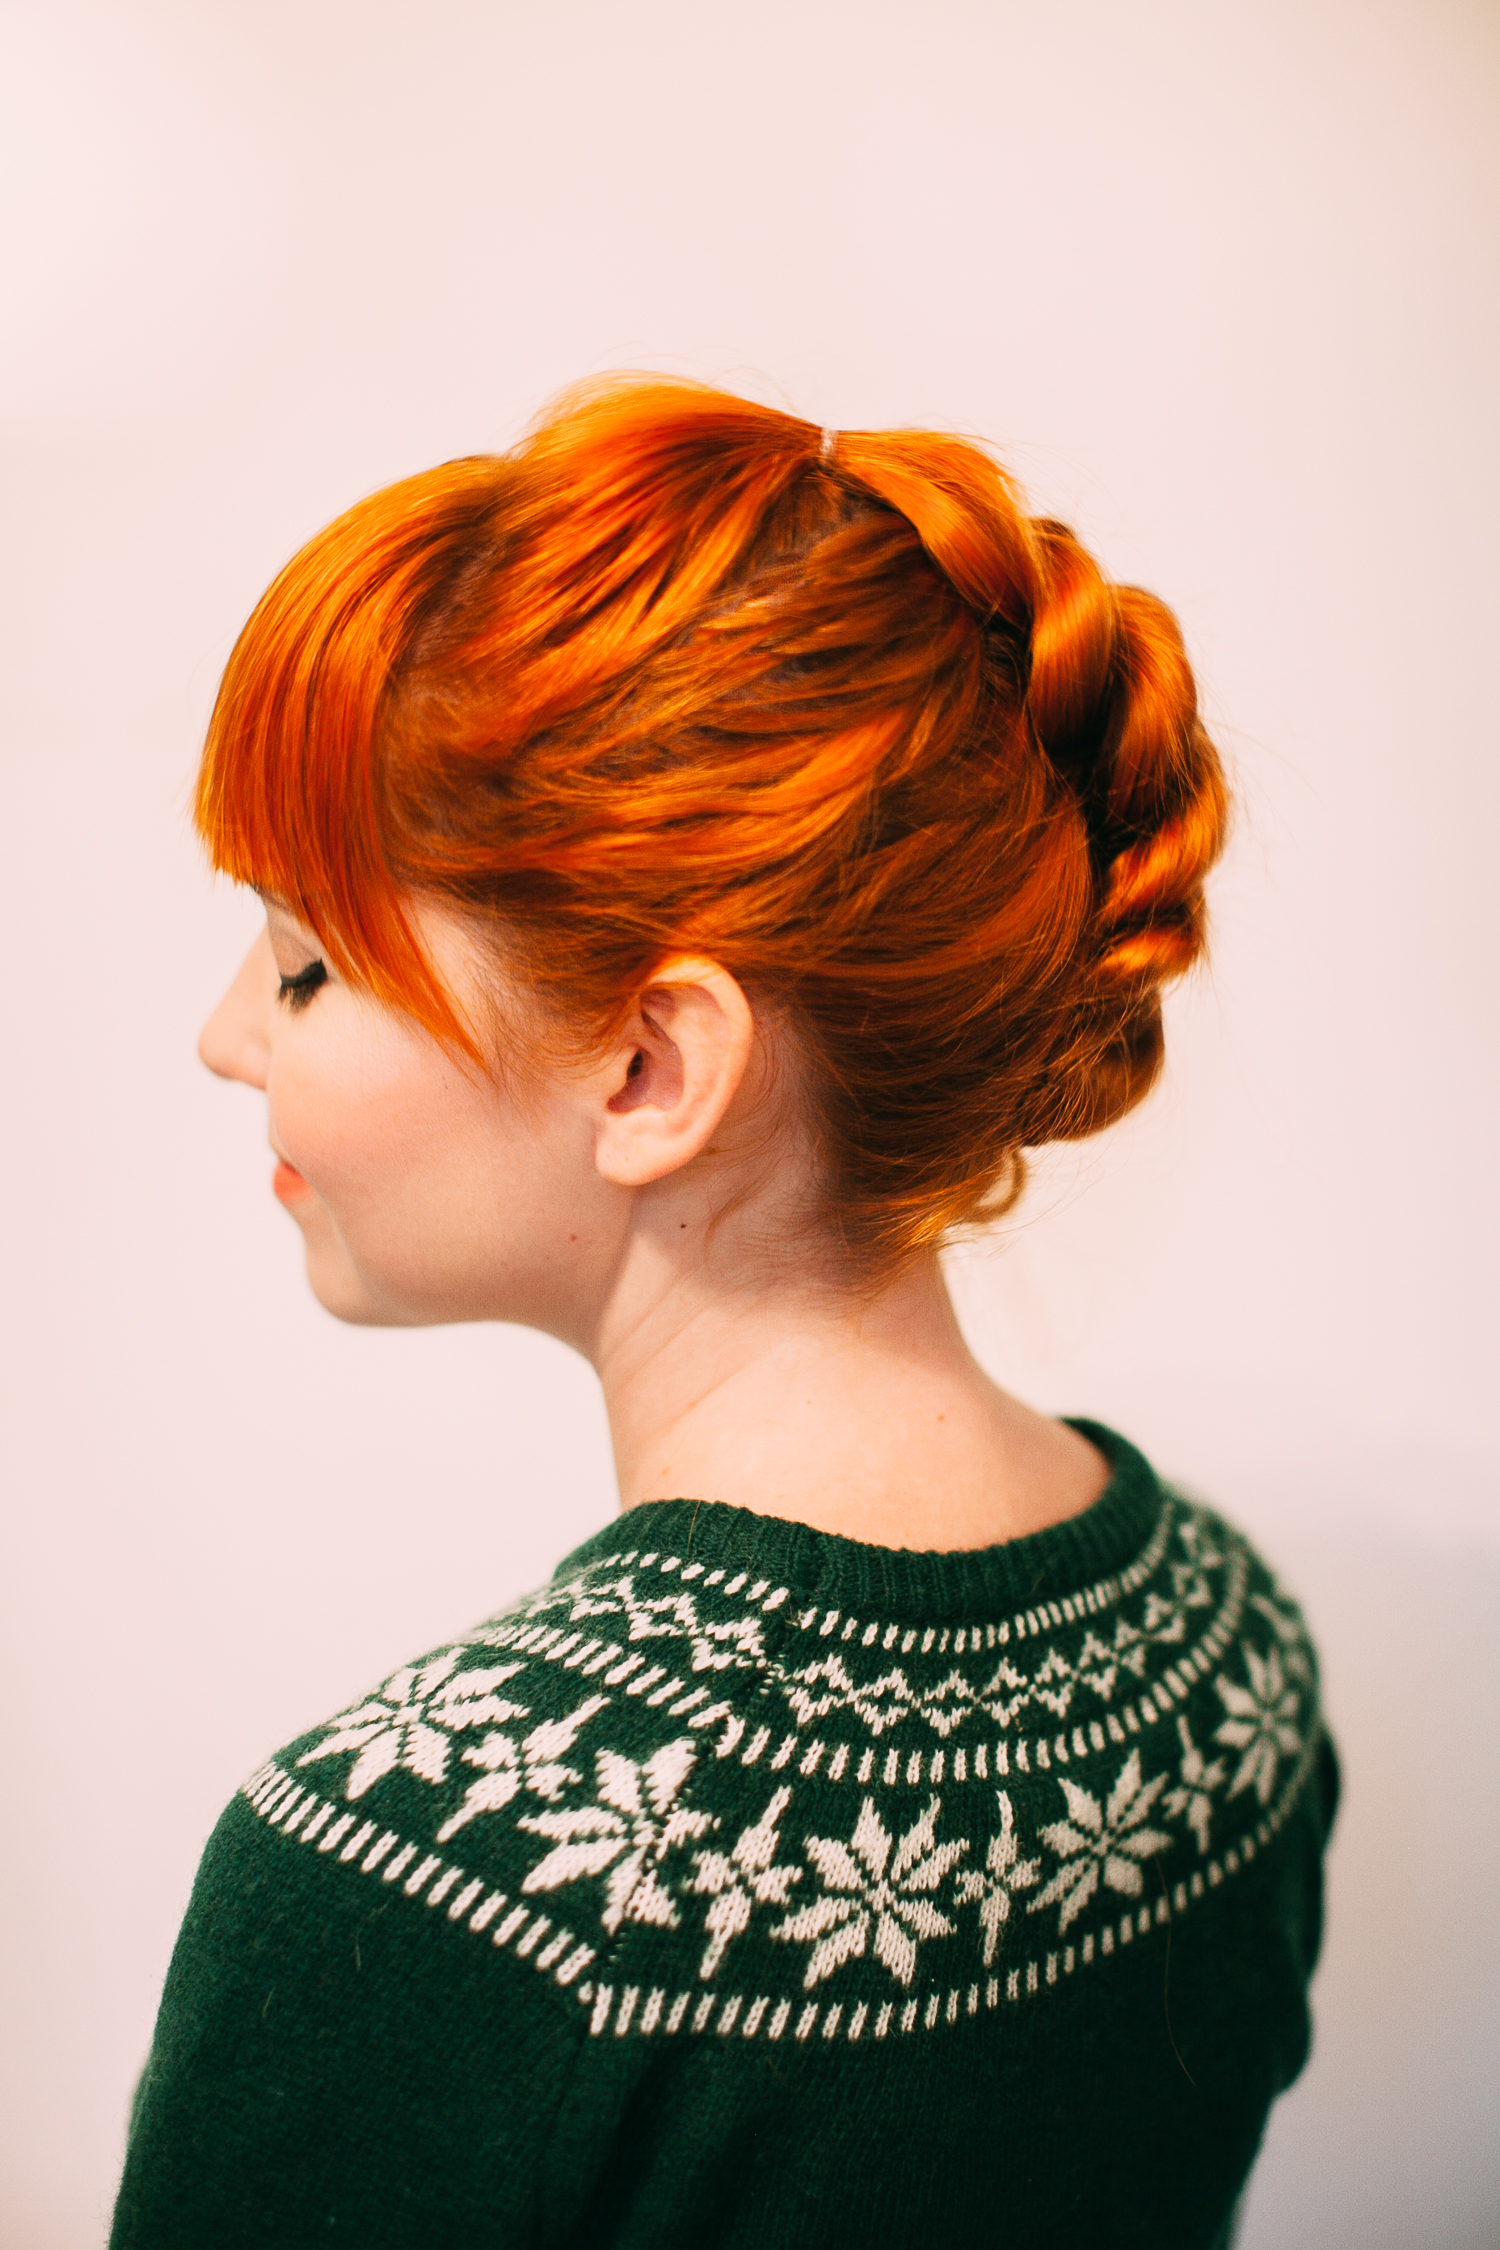 Faux braid updo for shorter hair (click-through for the full tutorial)